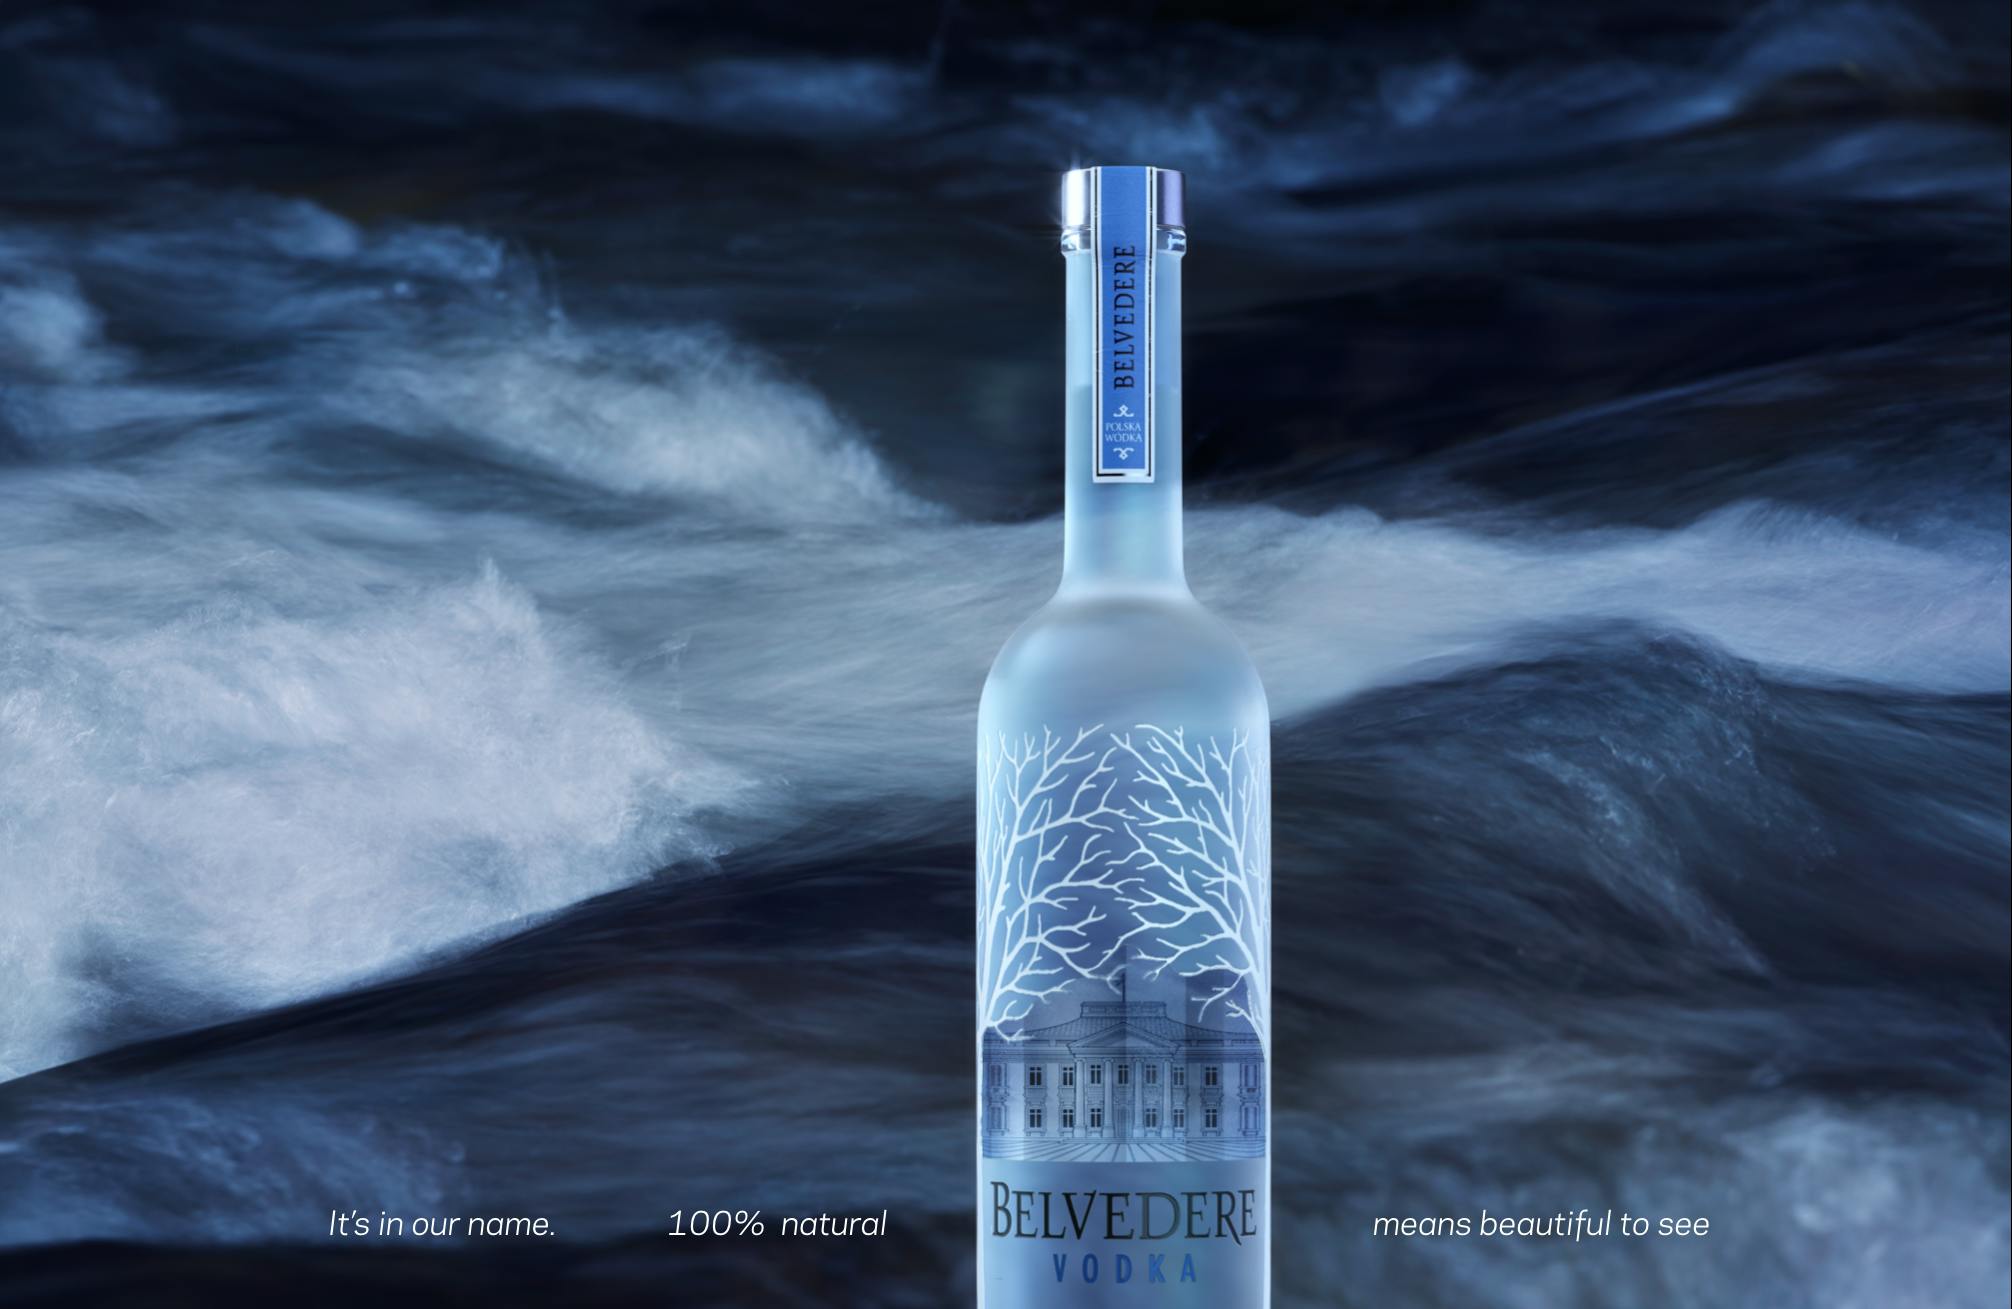 A Belvedere Vodka bottle in front of the moving ocean